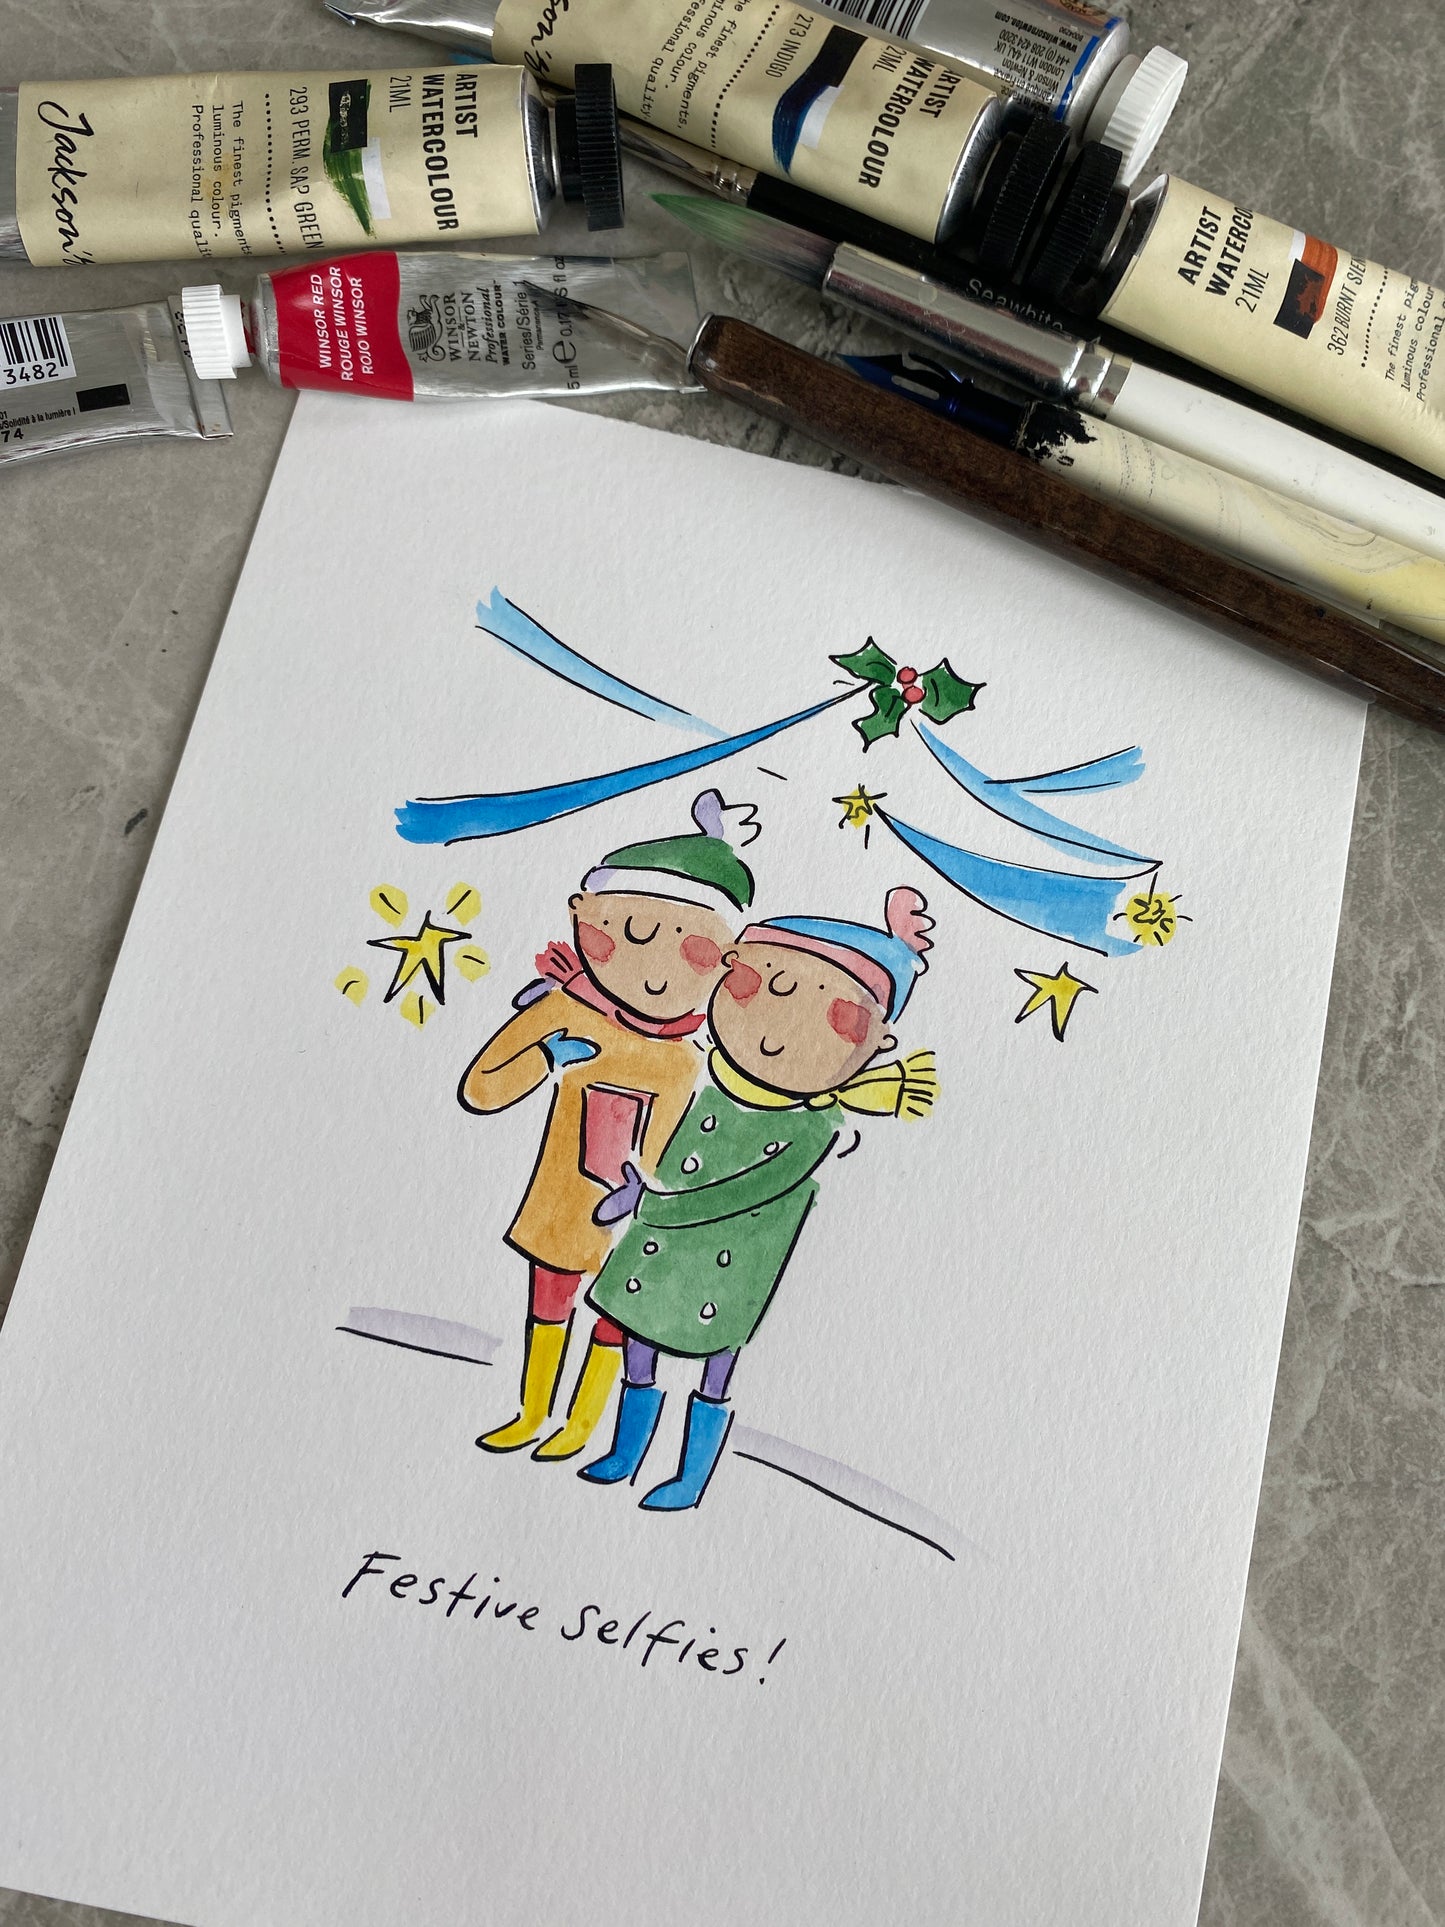 Festive Selfies original pen and ink and watercolour illustration by Rosie Brooks